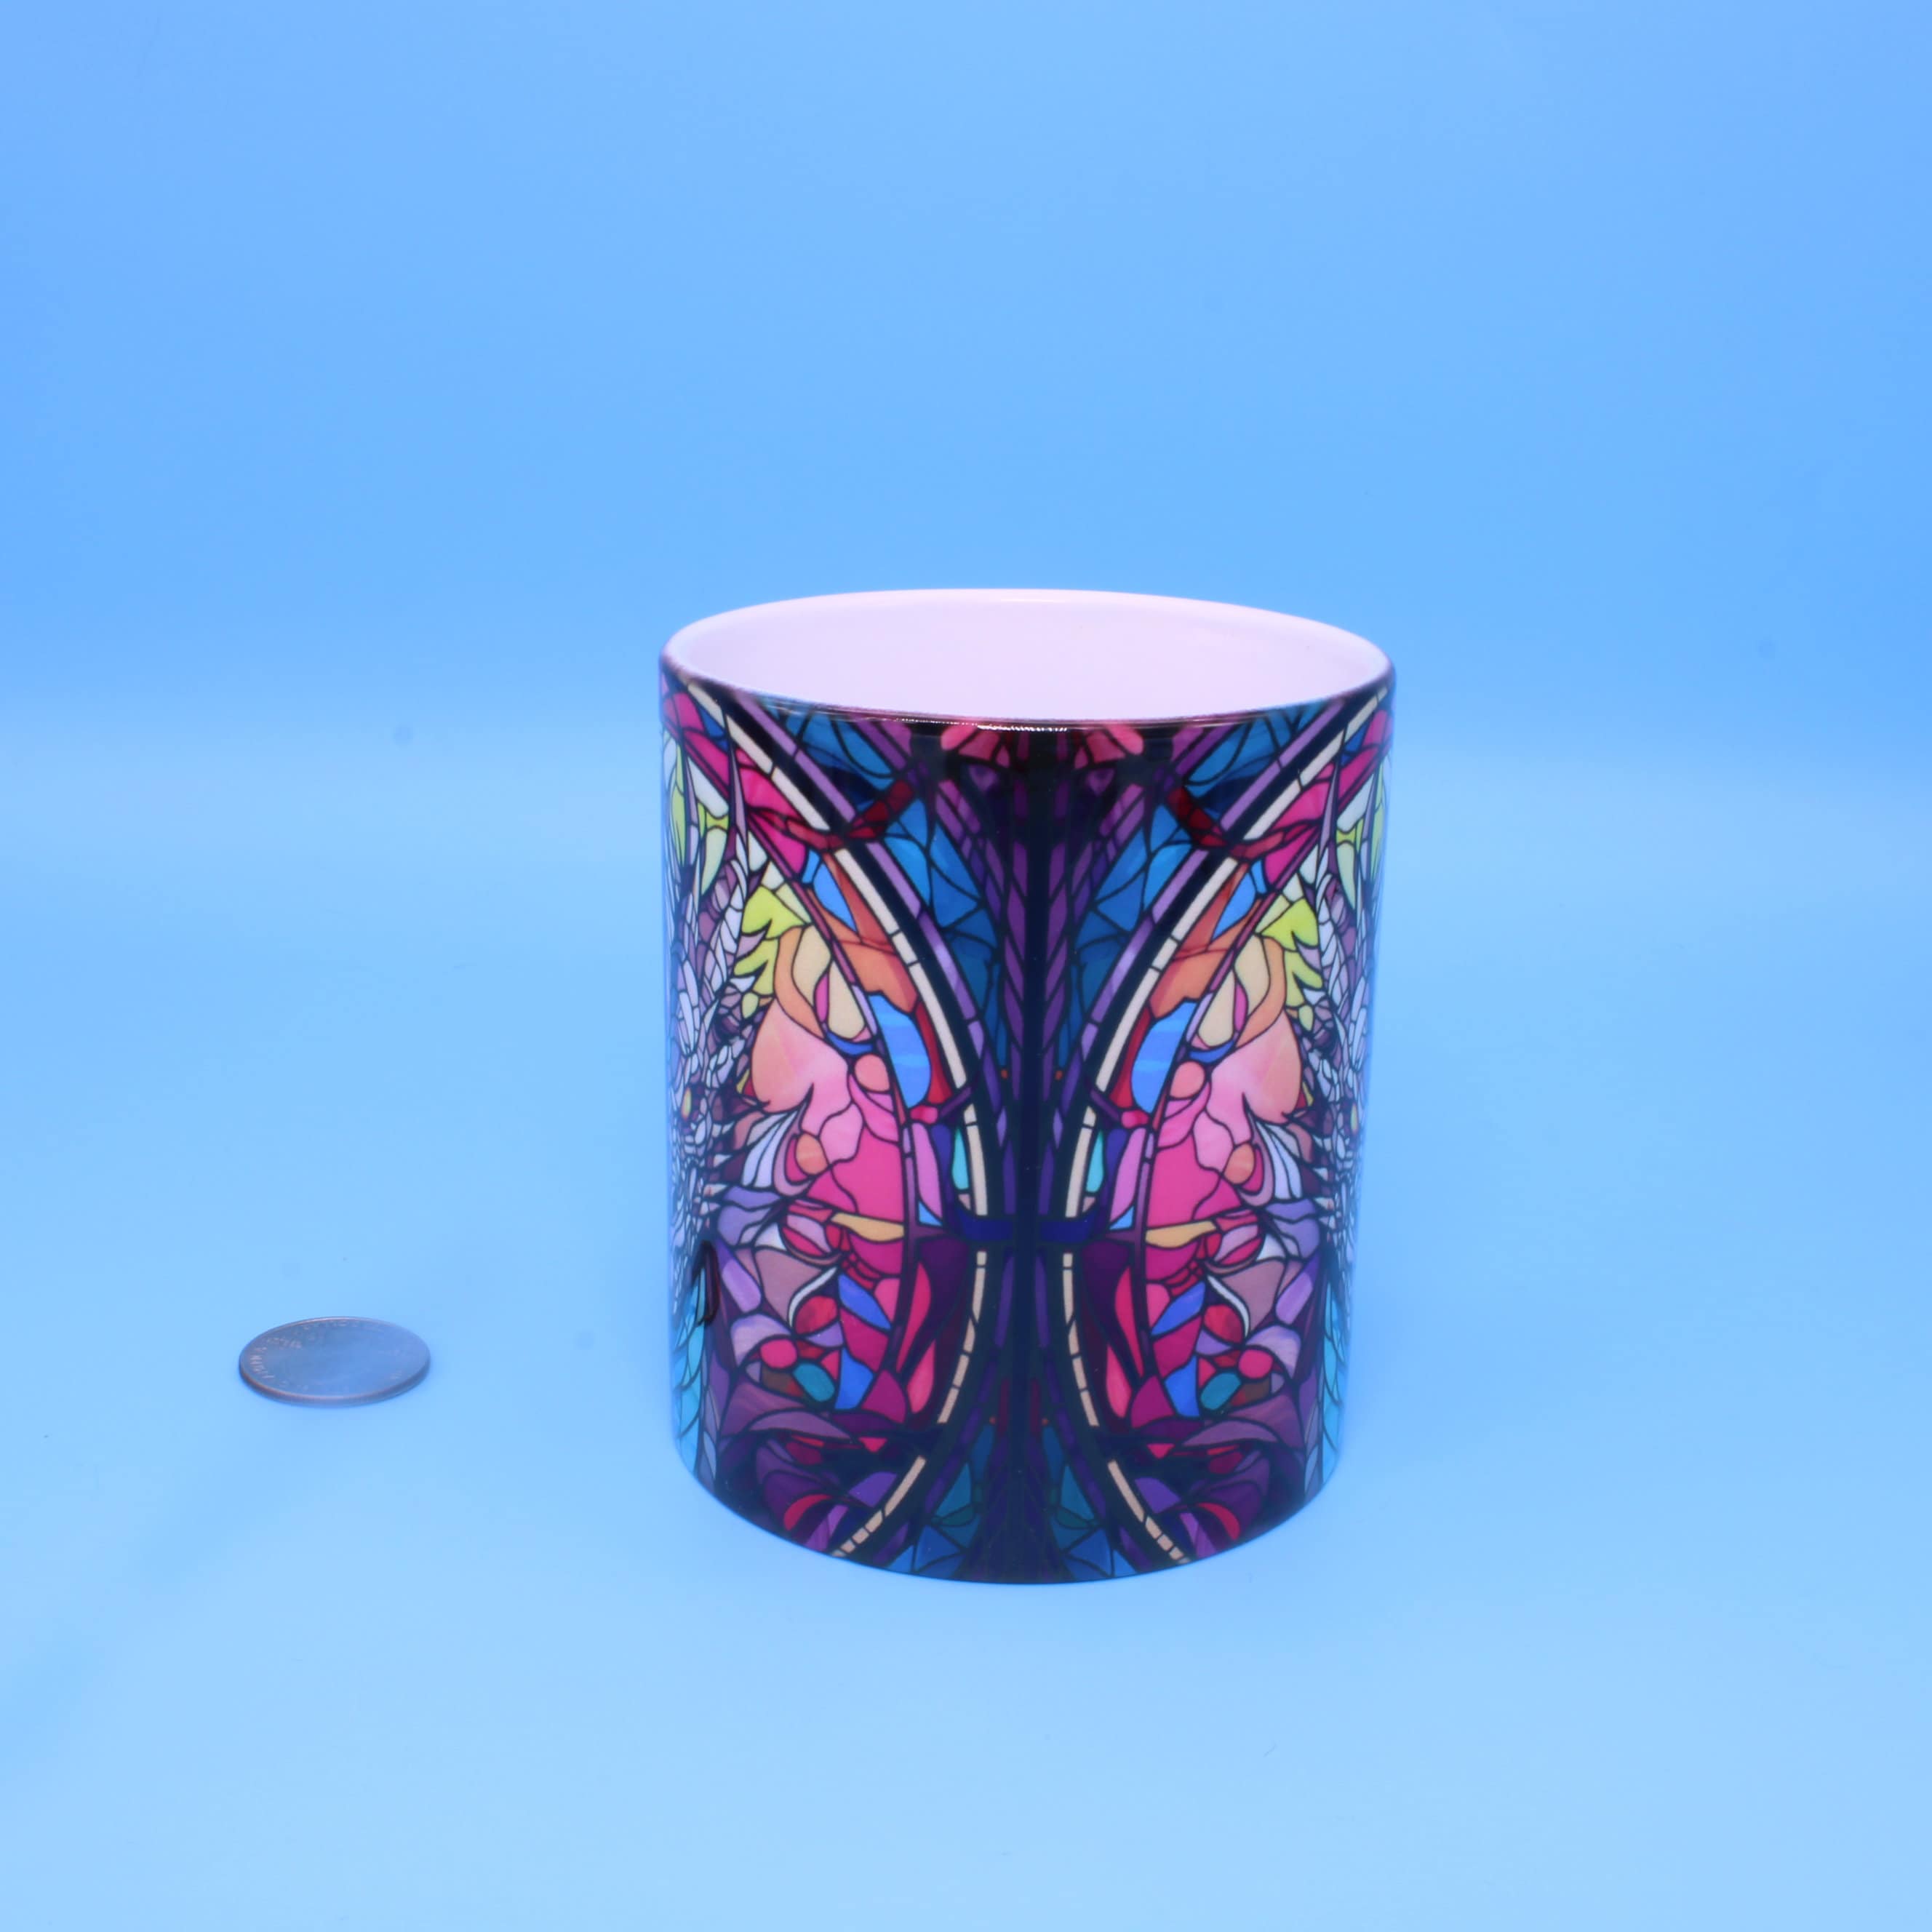 Dragon "Stained Glass" Ceramic Mug - Hot chocolate | Coffee | Hot Tea 11 0z. Perfect gift!